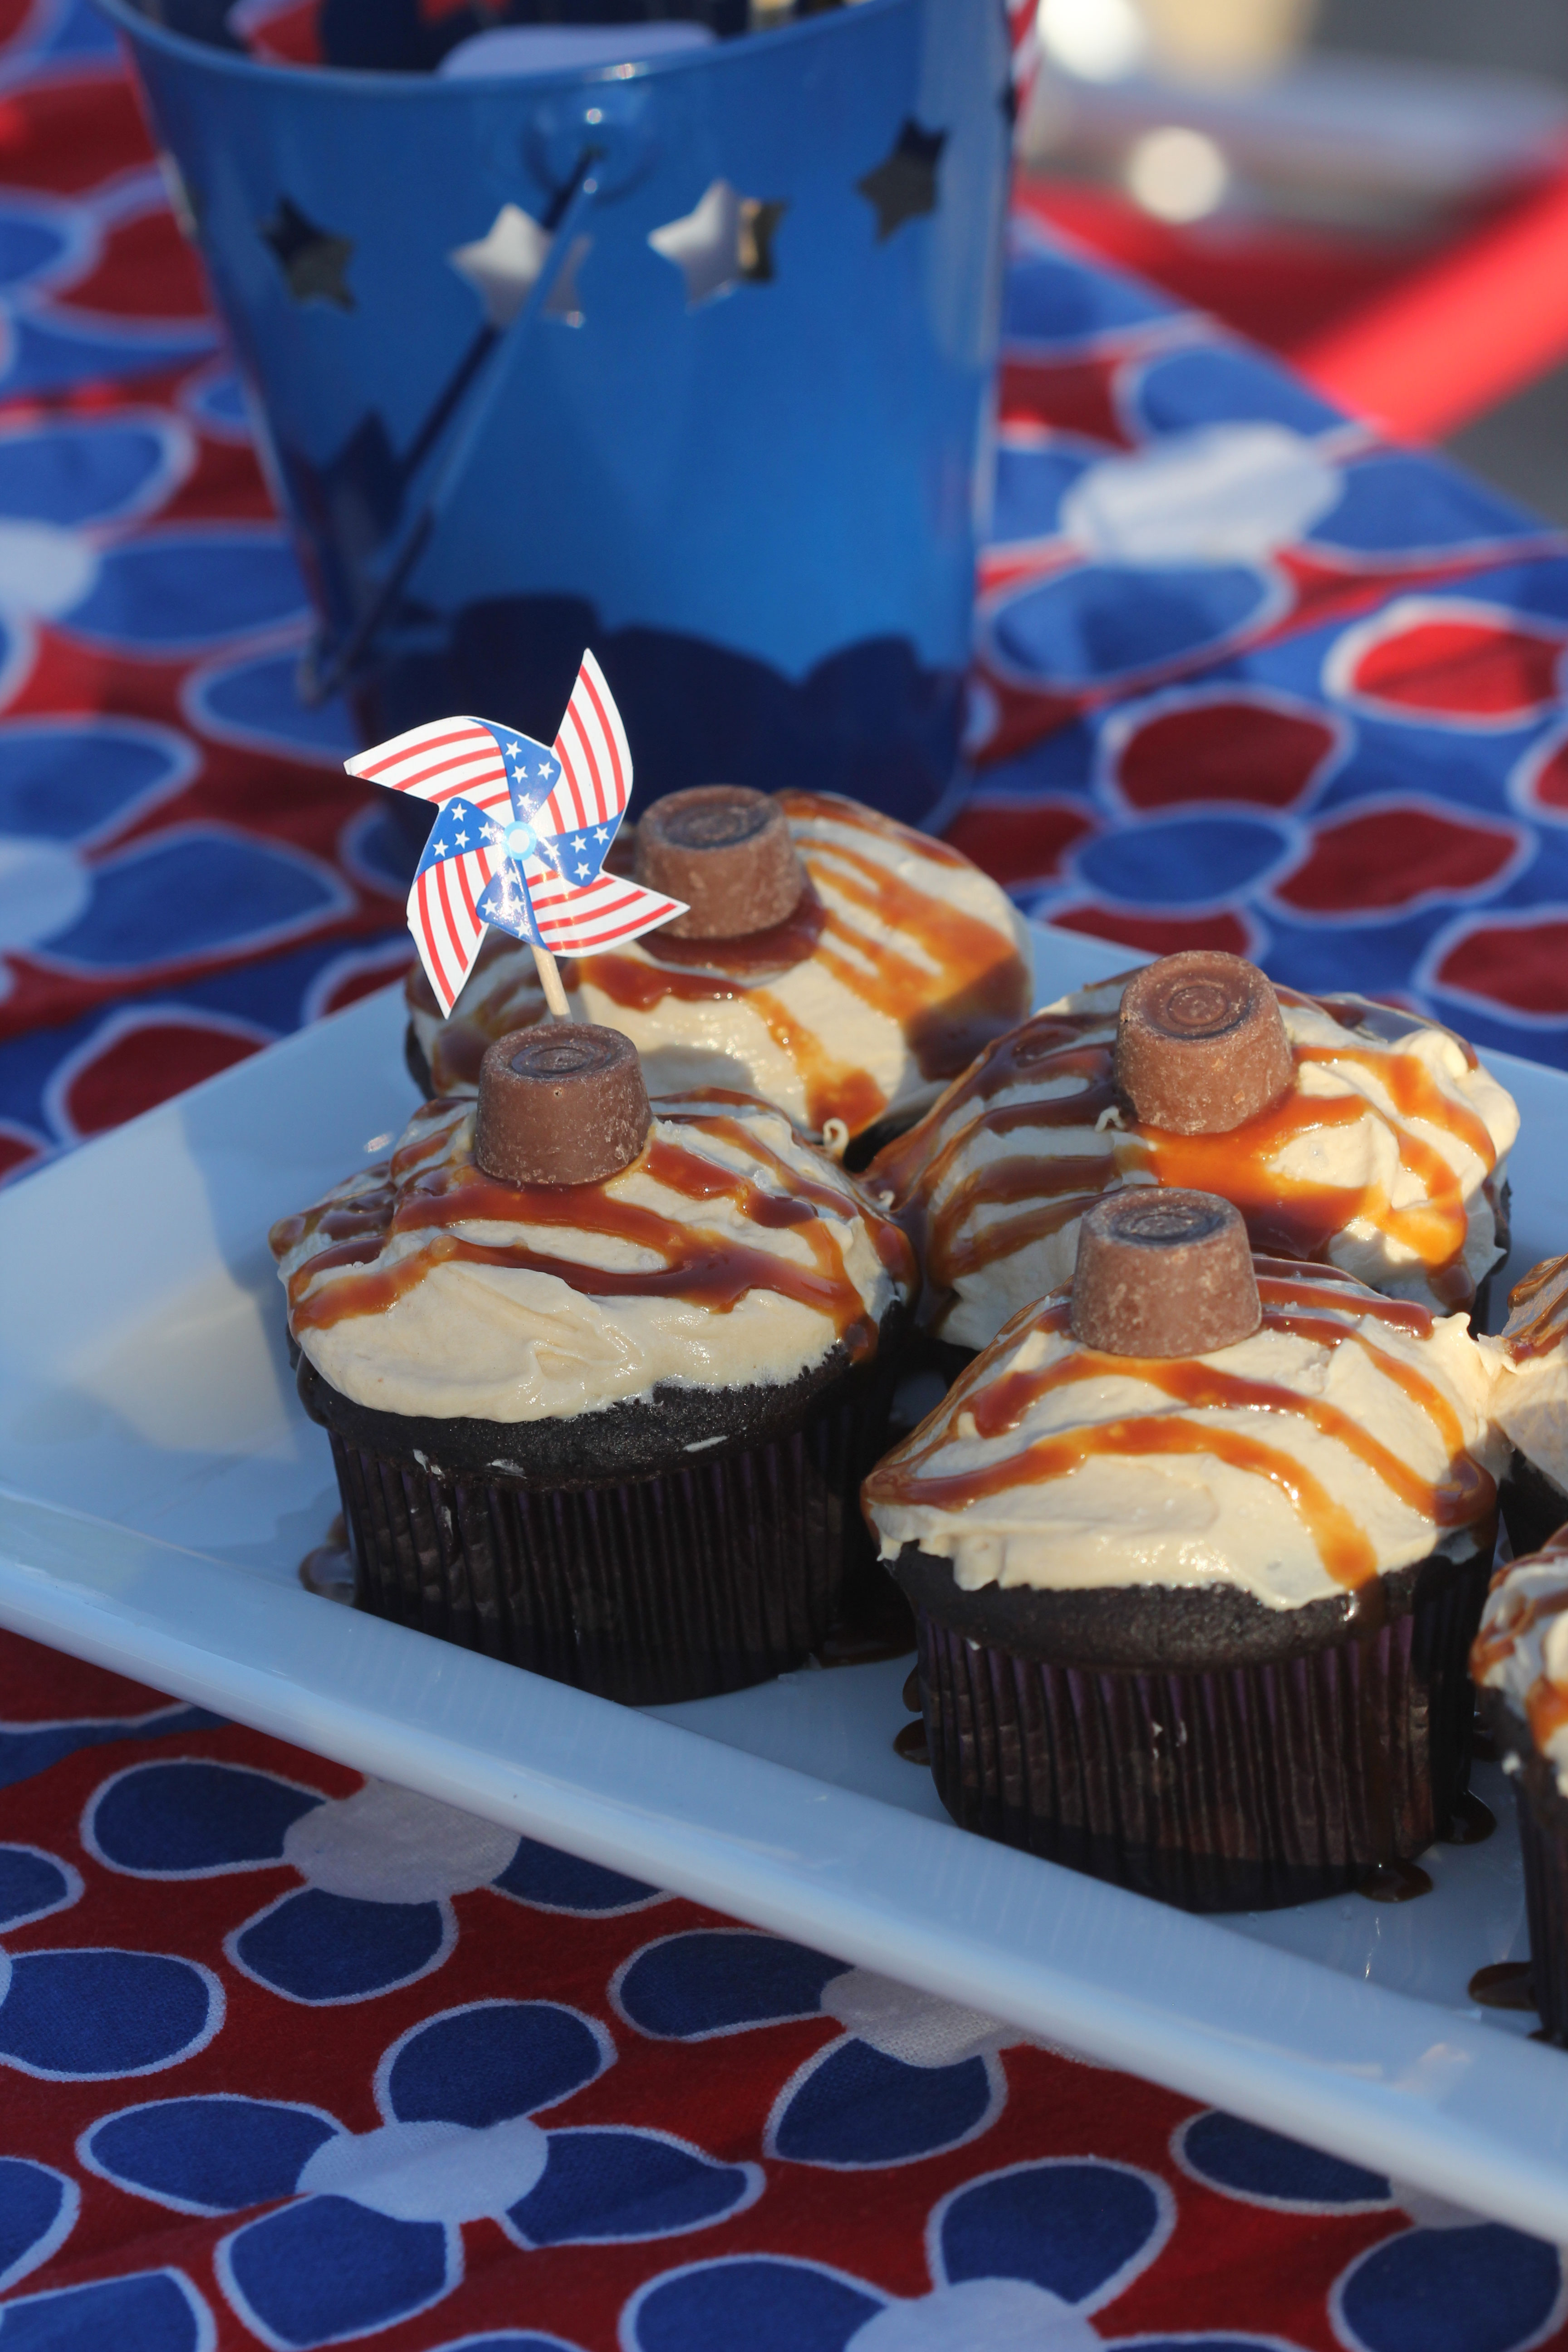 These salted caramel frosted chocolate cupcakes are so good! The perfect mix of yummy chocolate and salty caramel!